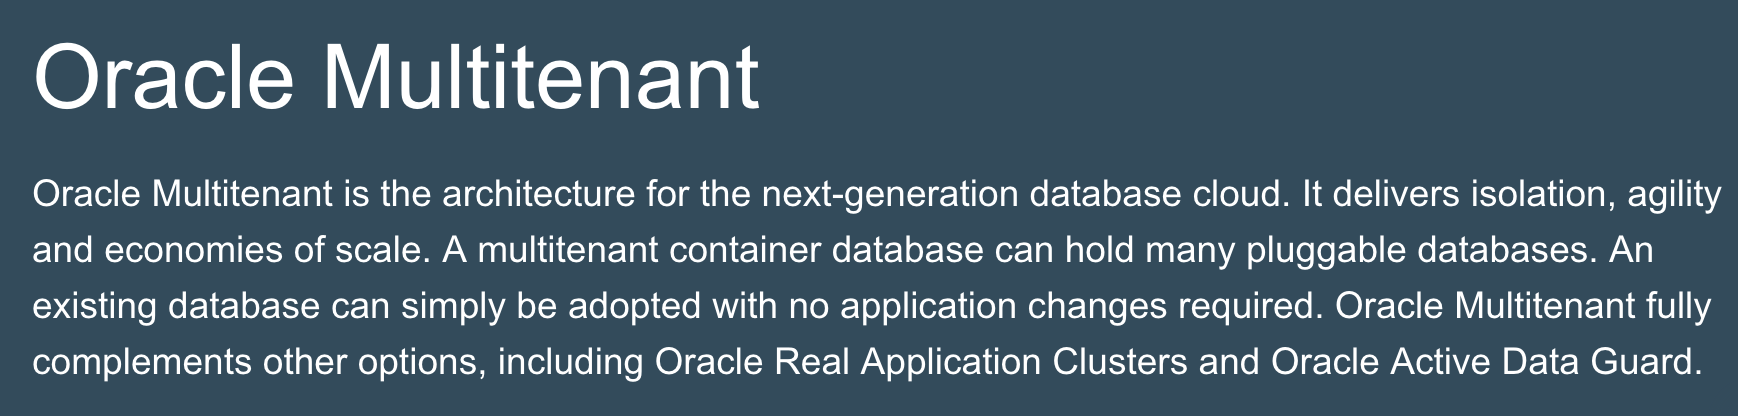 Oracle Multitenant is the architecture for the next-generation database cloud.